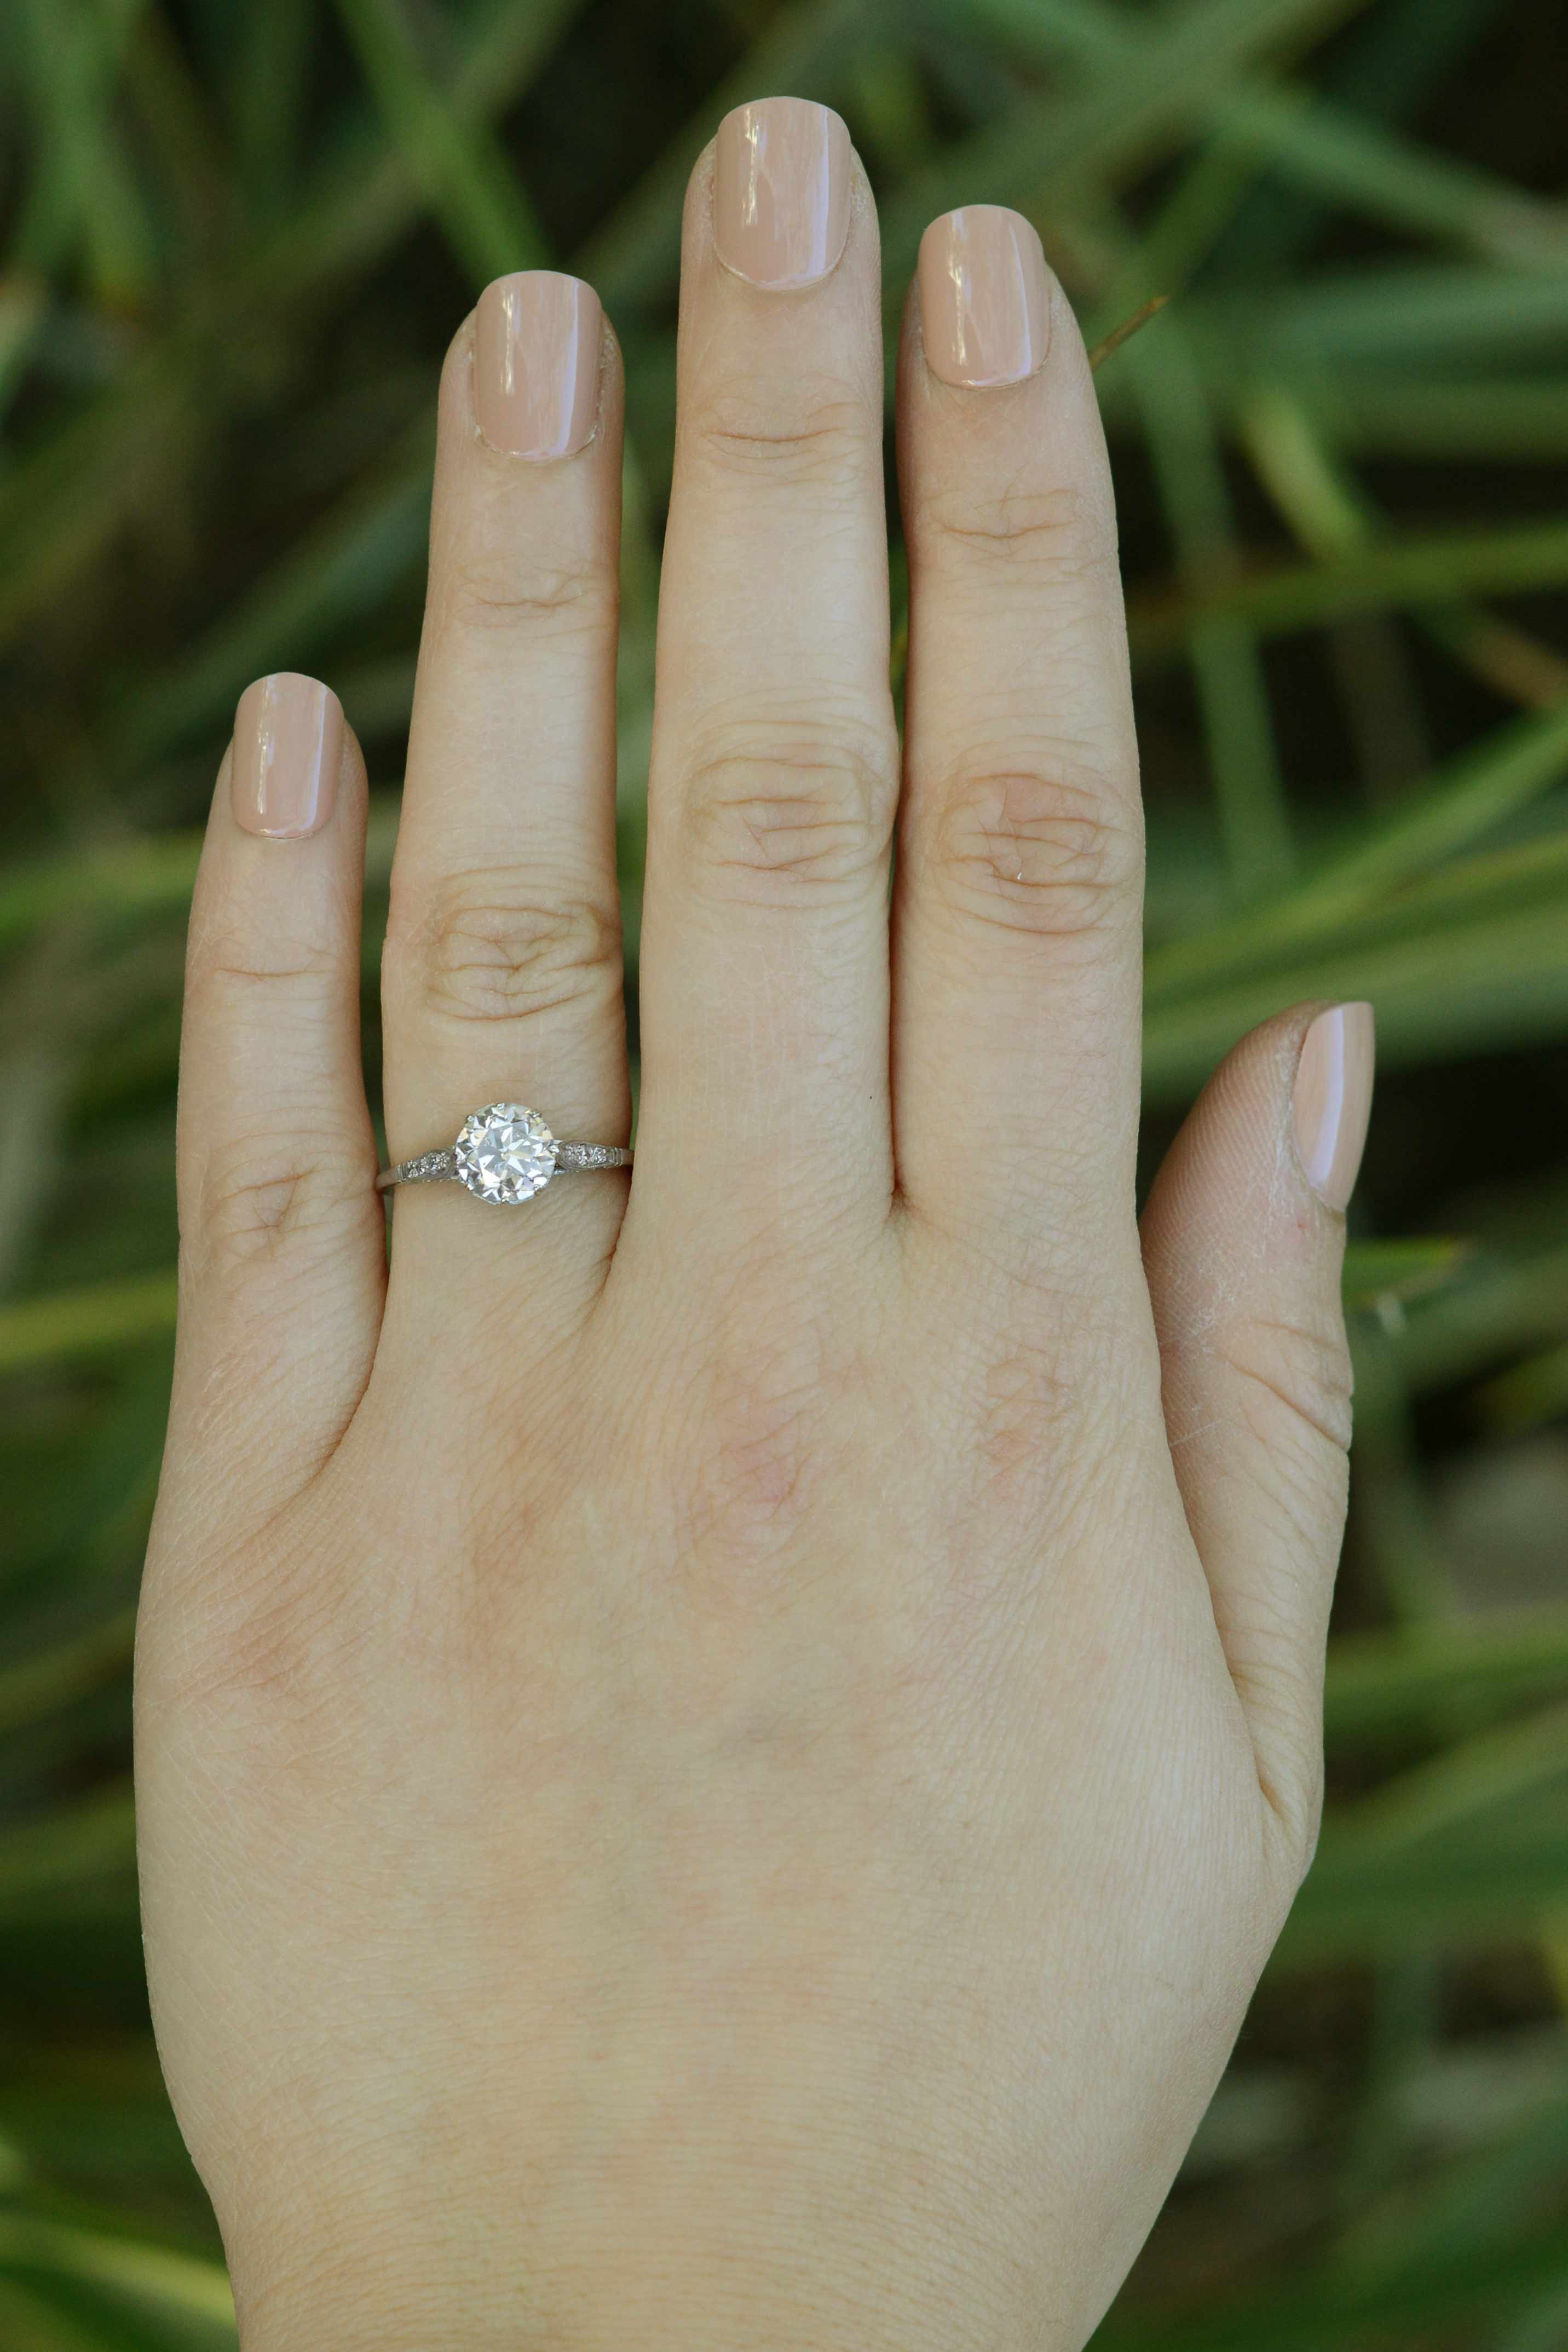 A large one carat diamond engagement ring with accent diamonds on the shoulder and setting.